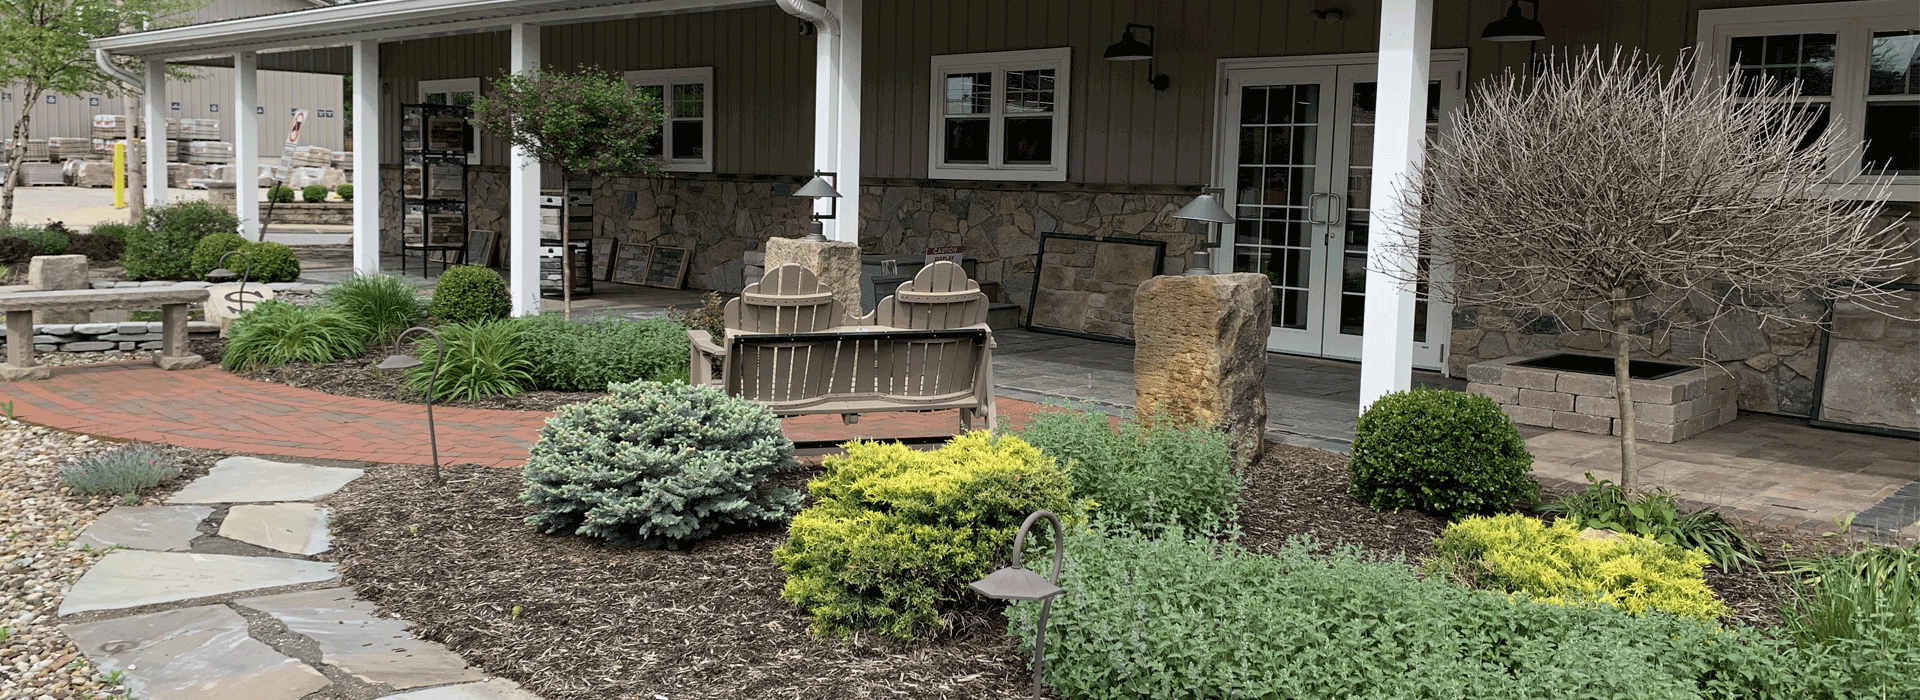 Valley City Supply natural landscape stone Ohio showroom and supply yard